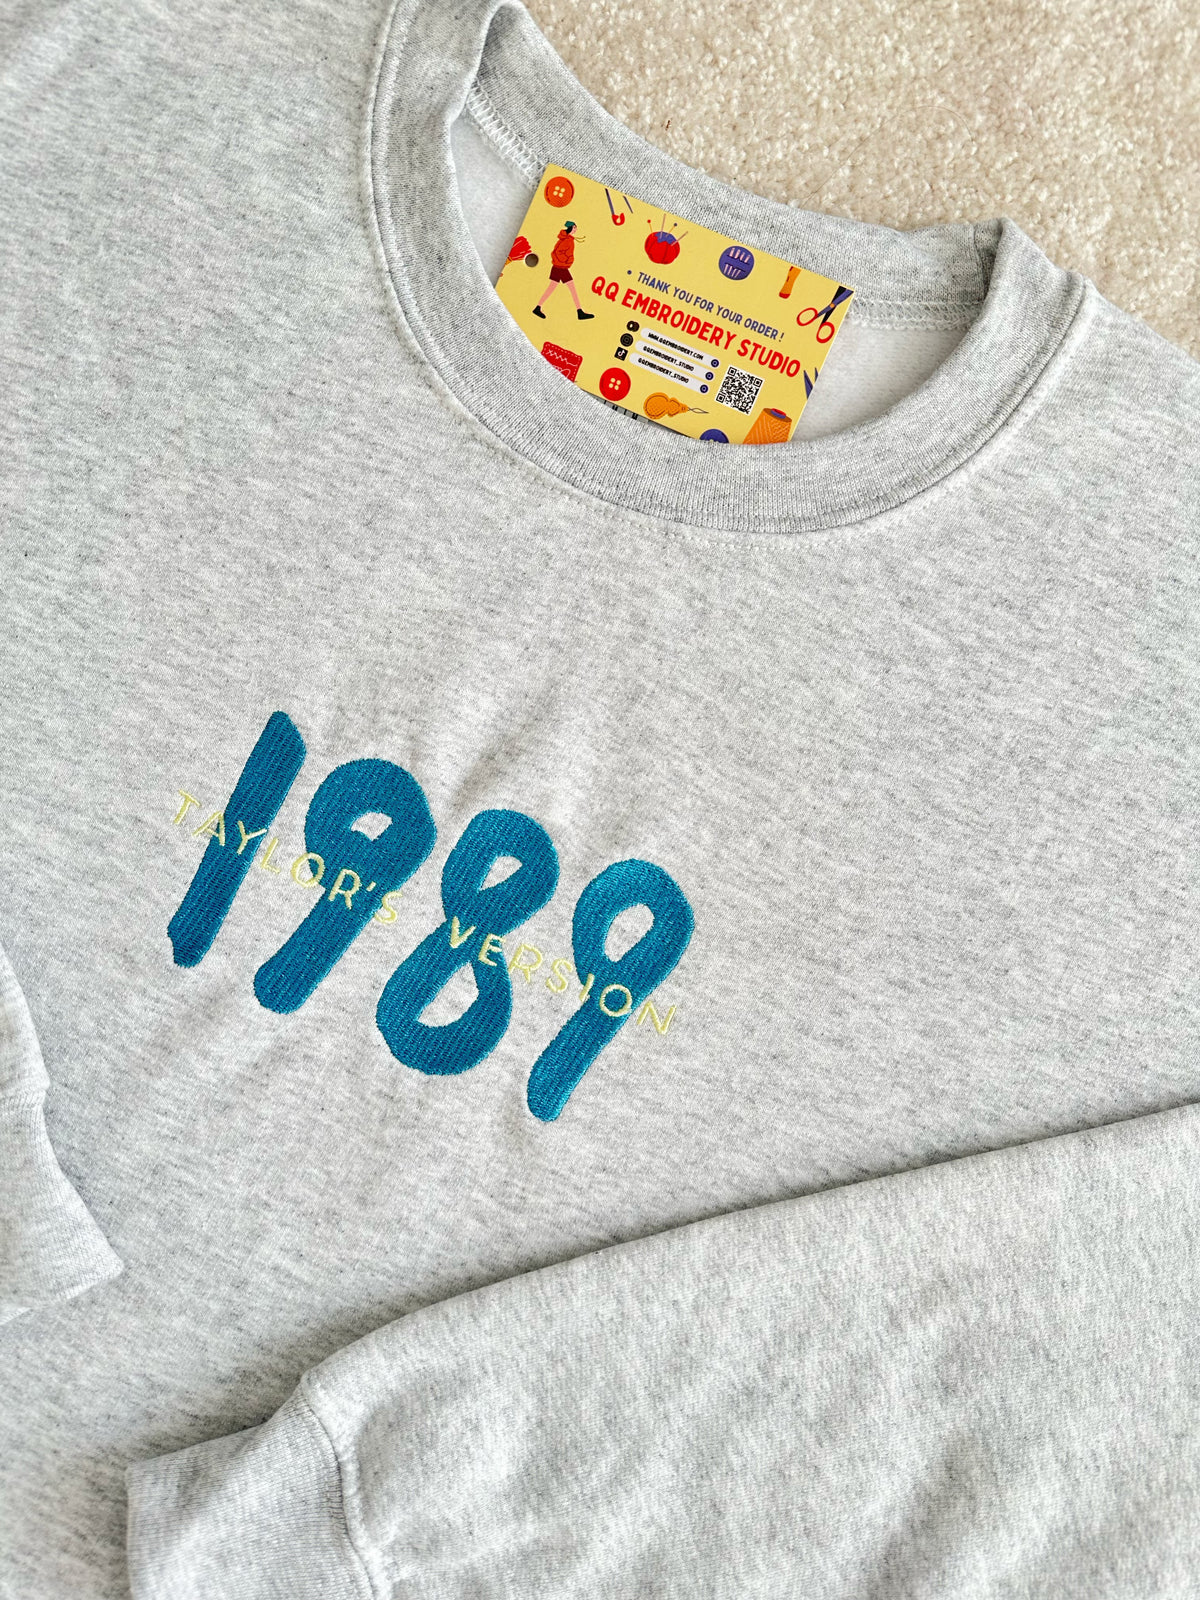 1989 TAYLOR'S VERSION EMBROIDERED CREWNECK